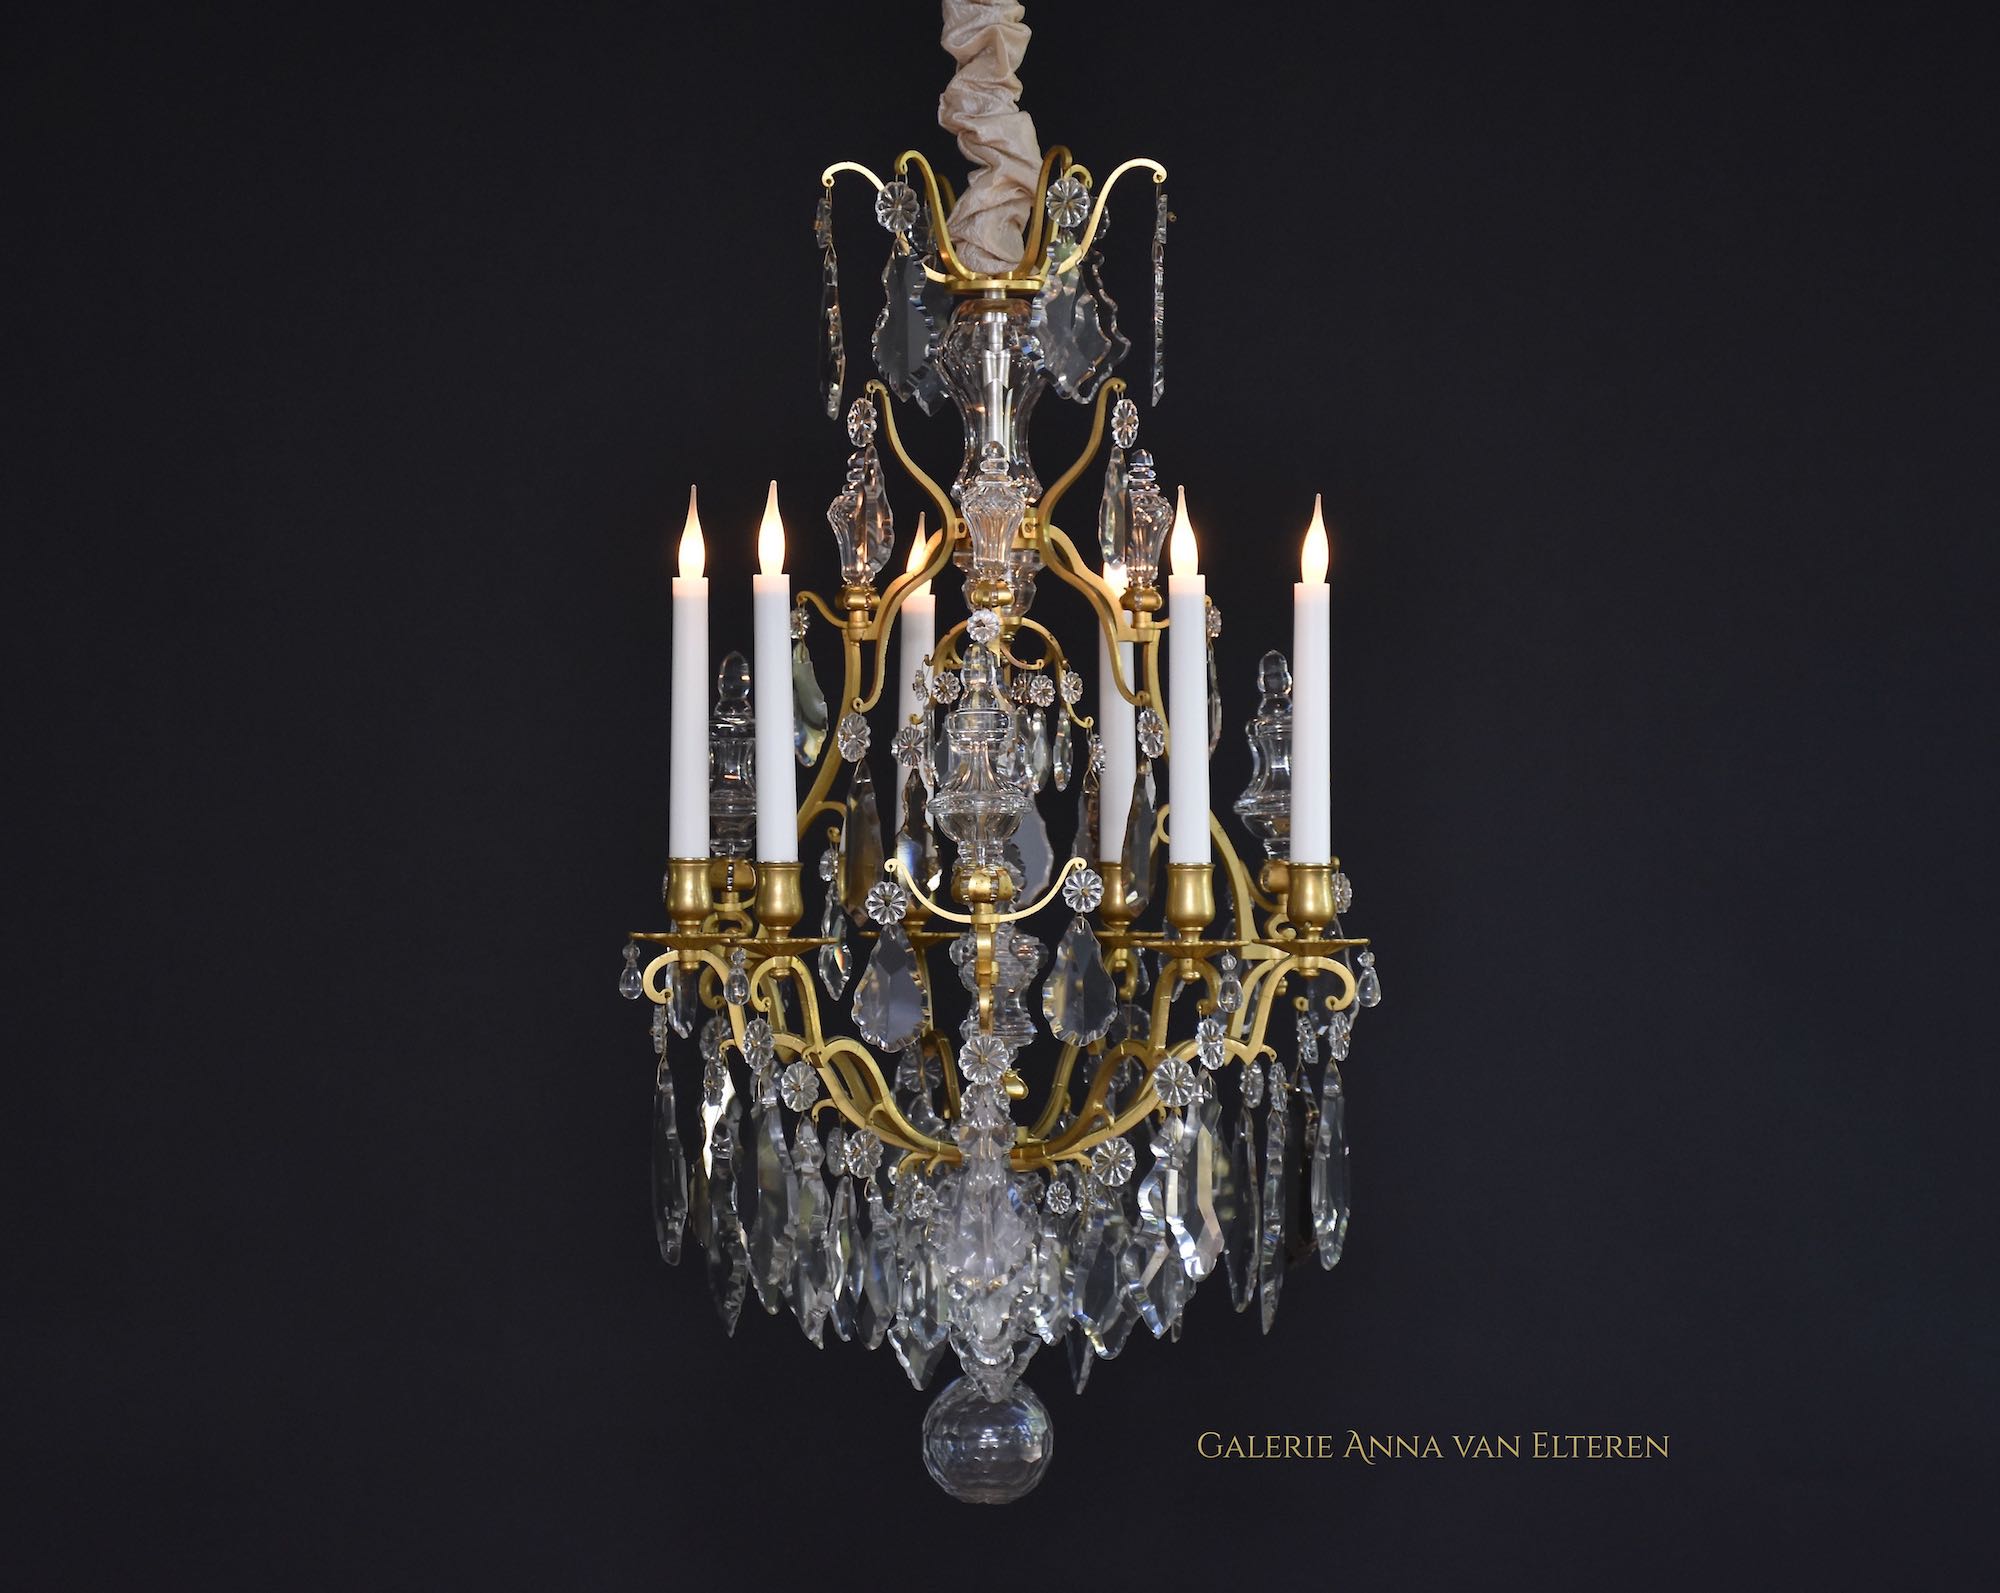 Antique gilt bronze French chandelier in the style of Louis XV